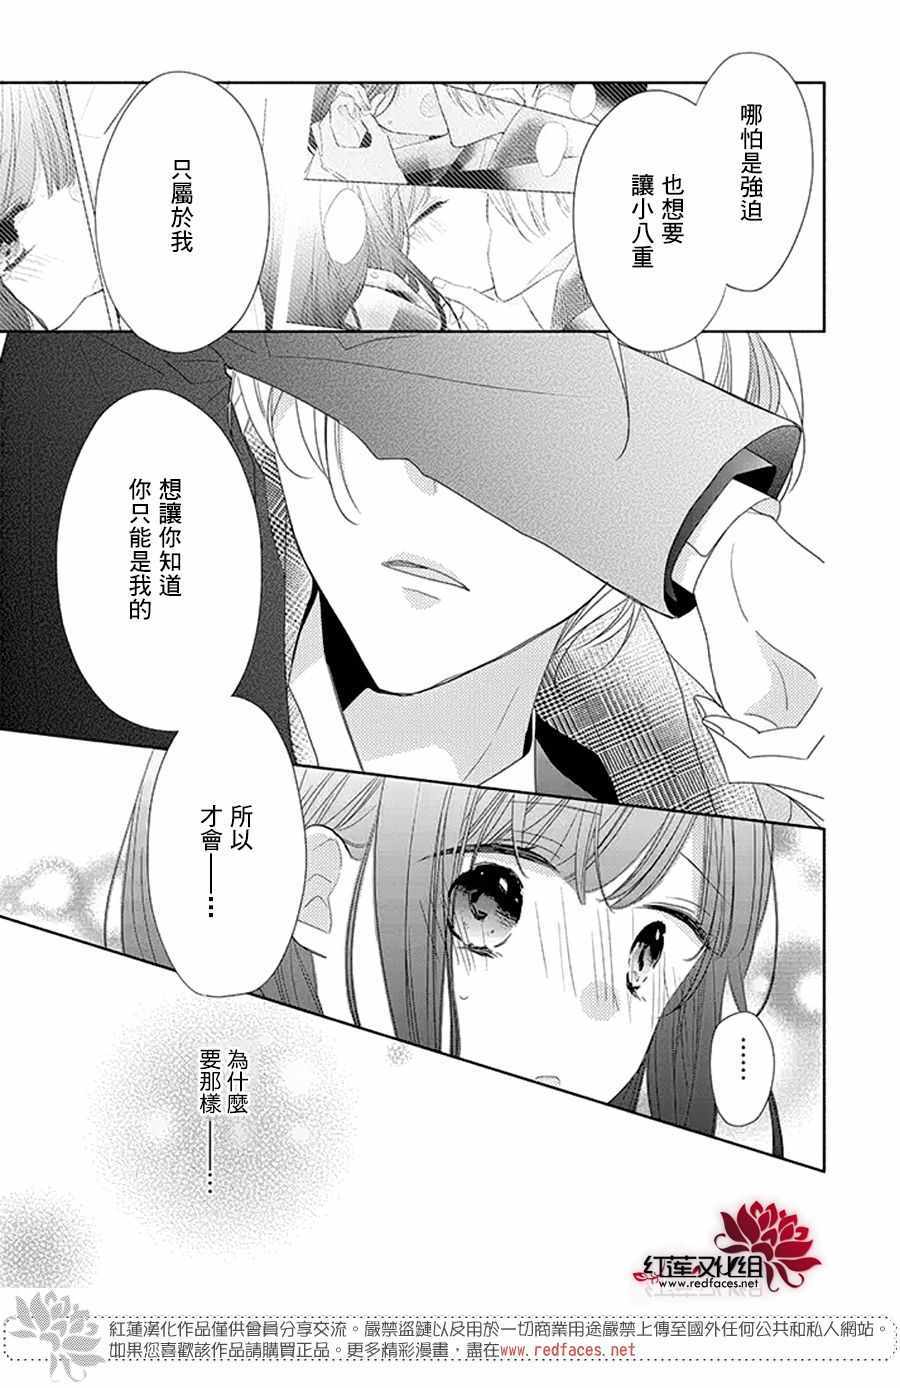 If given a second chance - 20話 - 3